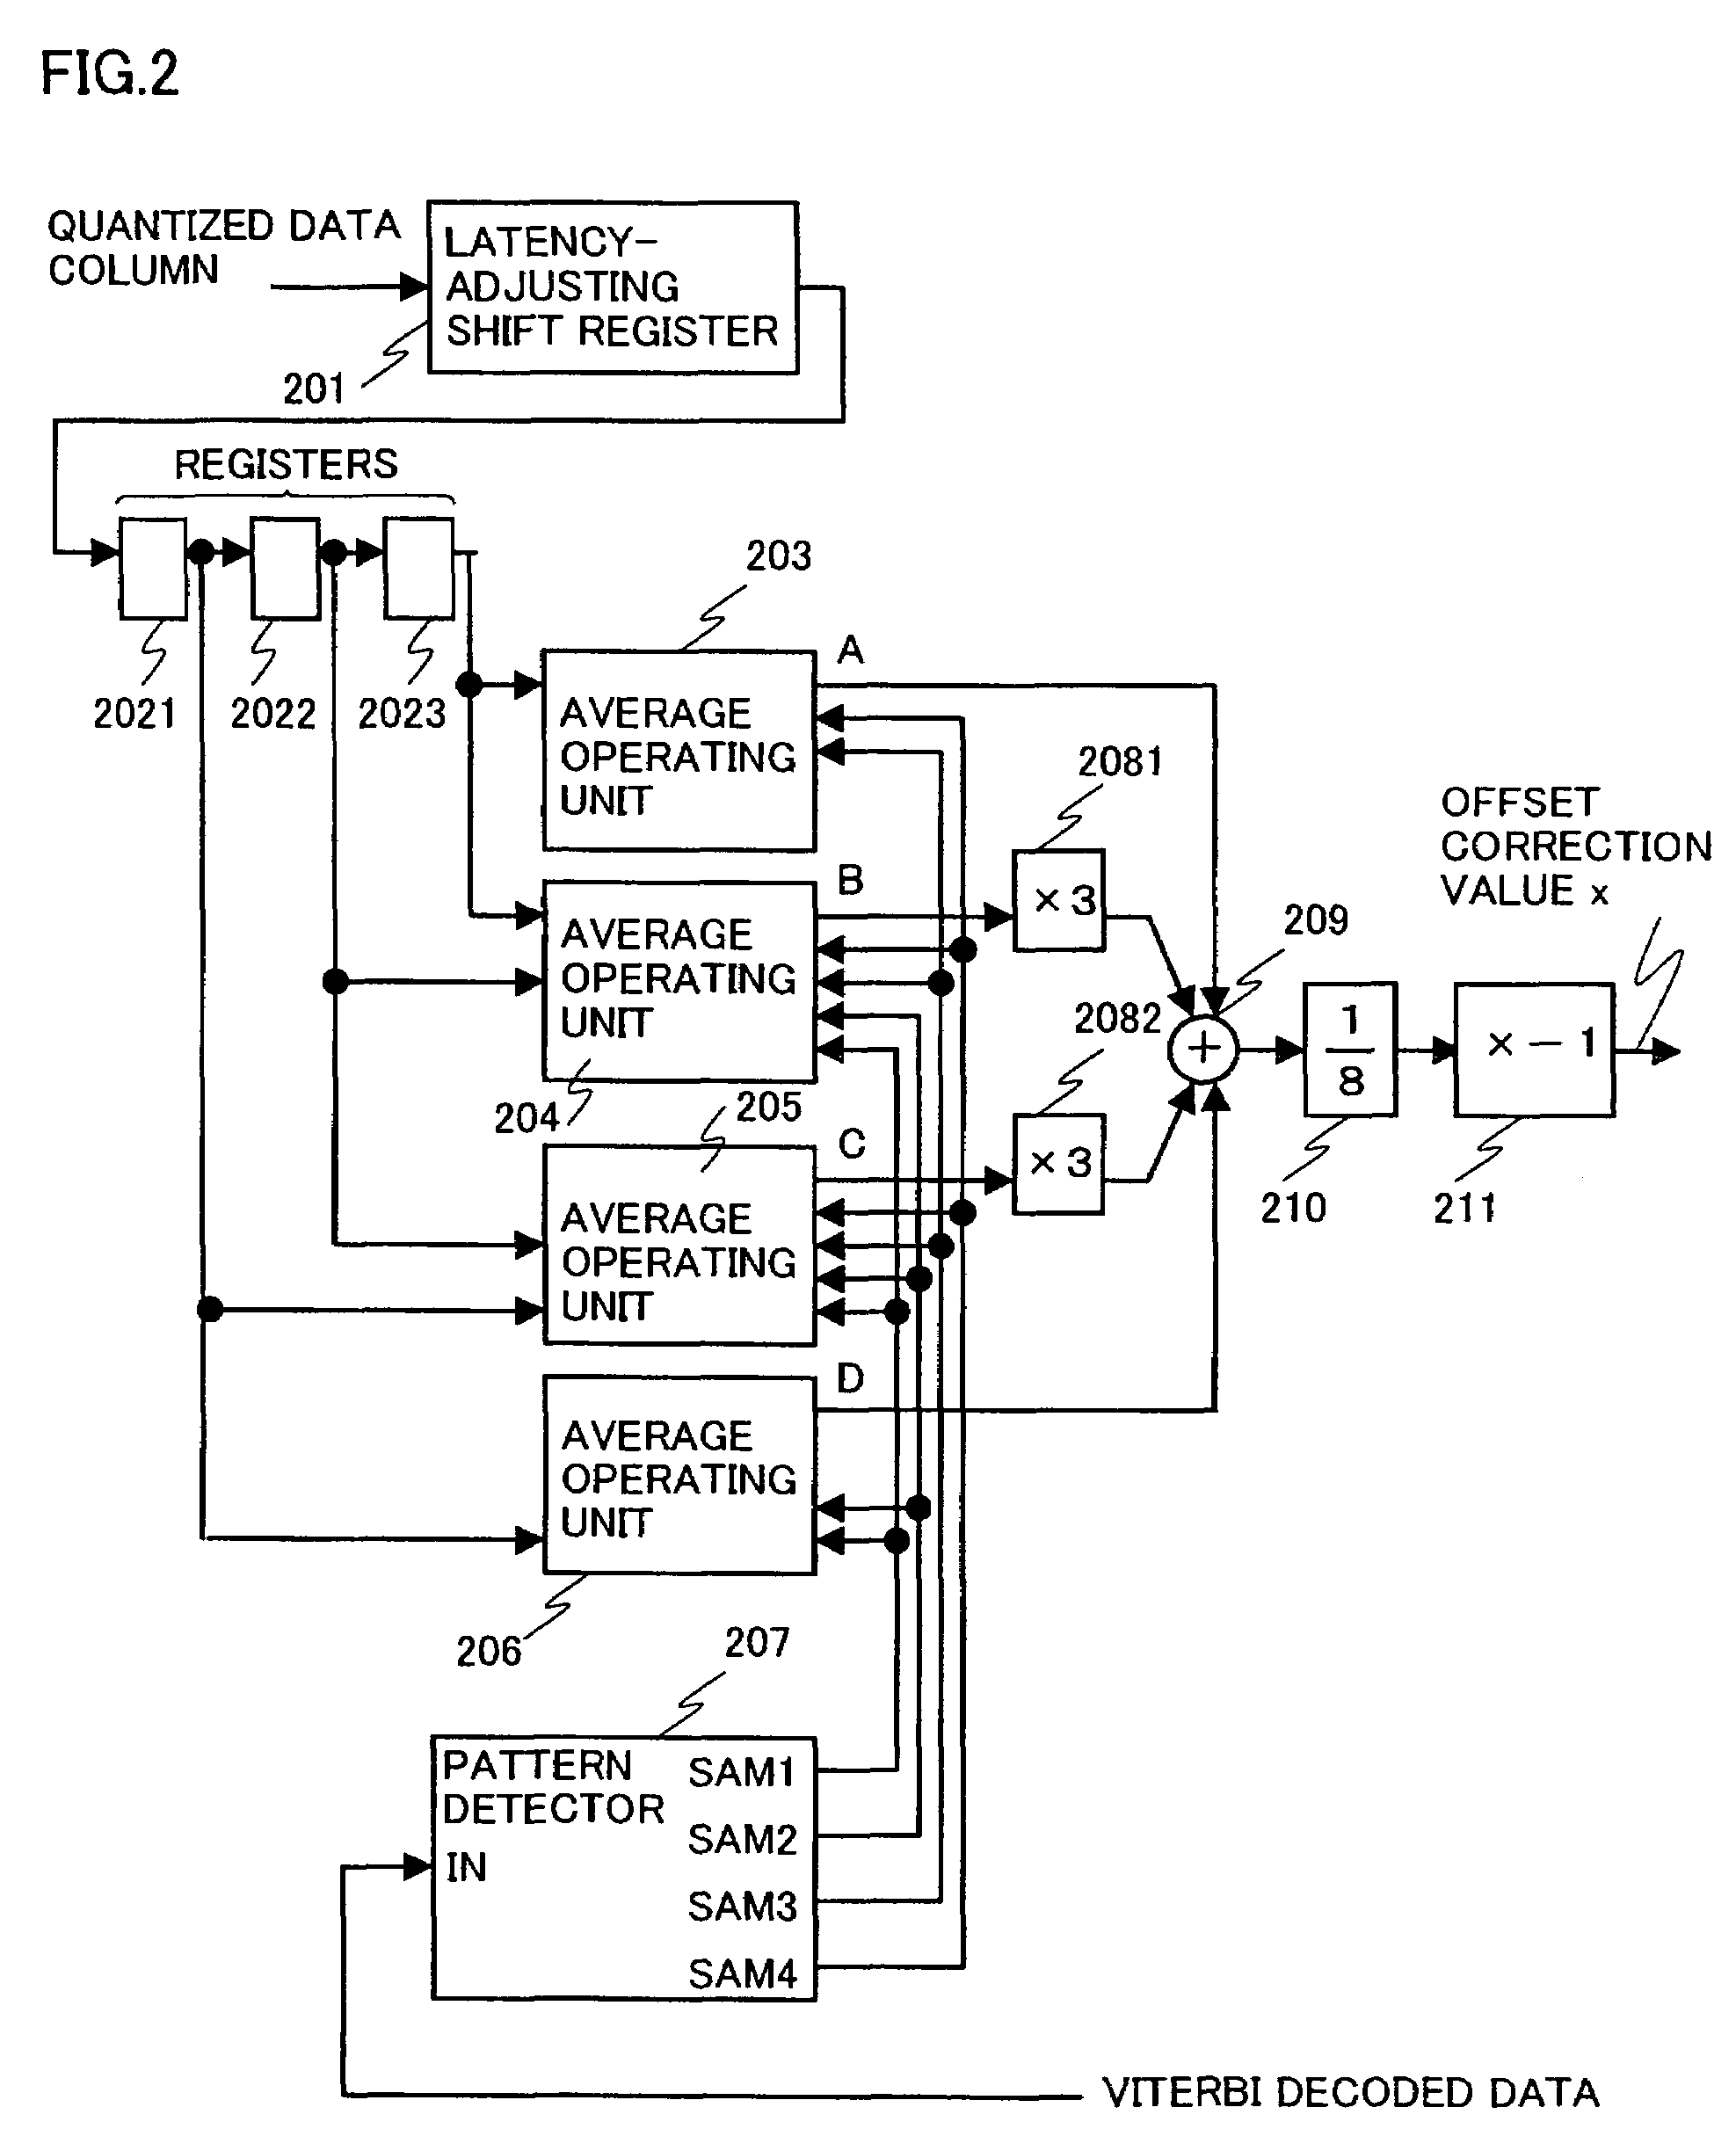 Apparatus and method of correcting offset